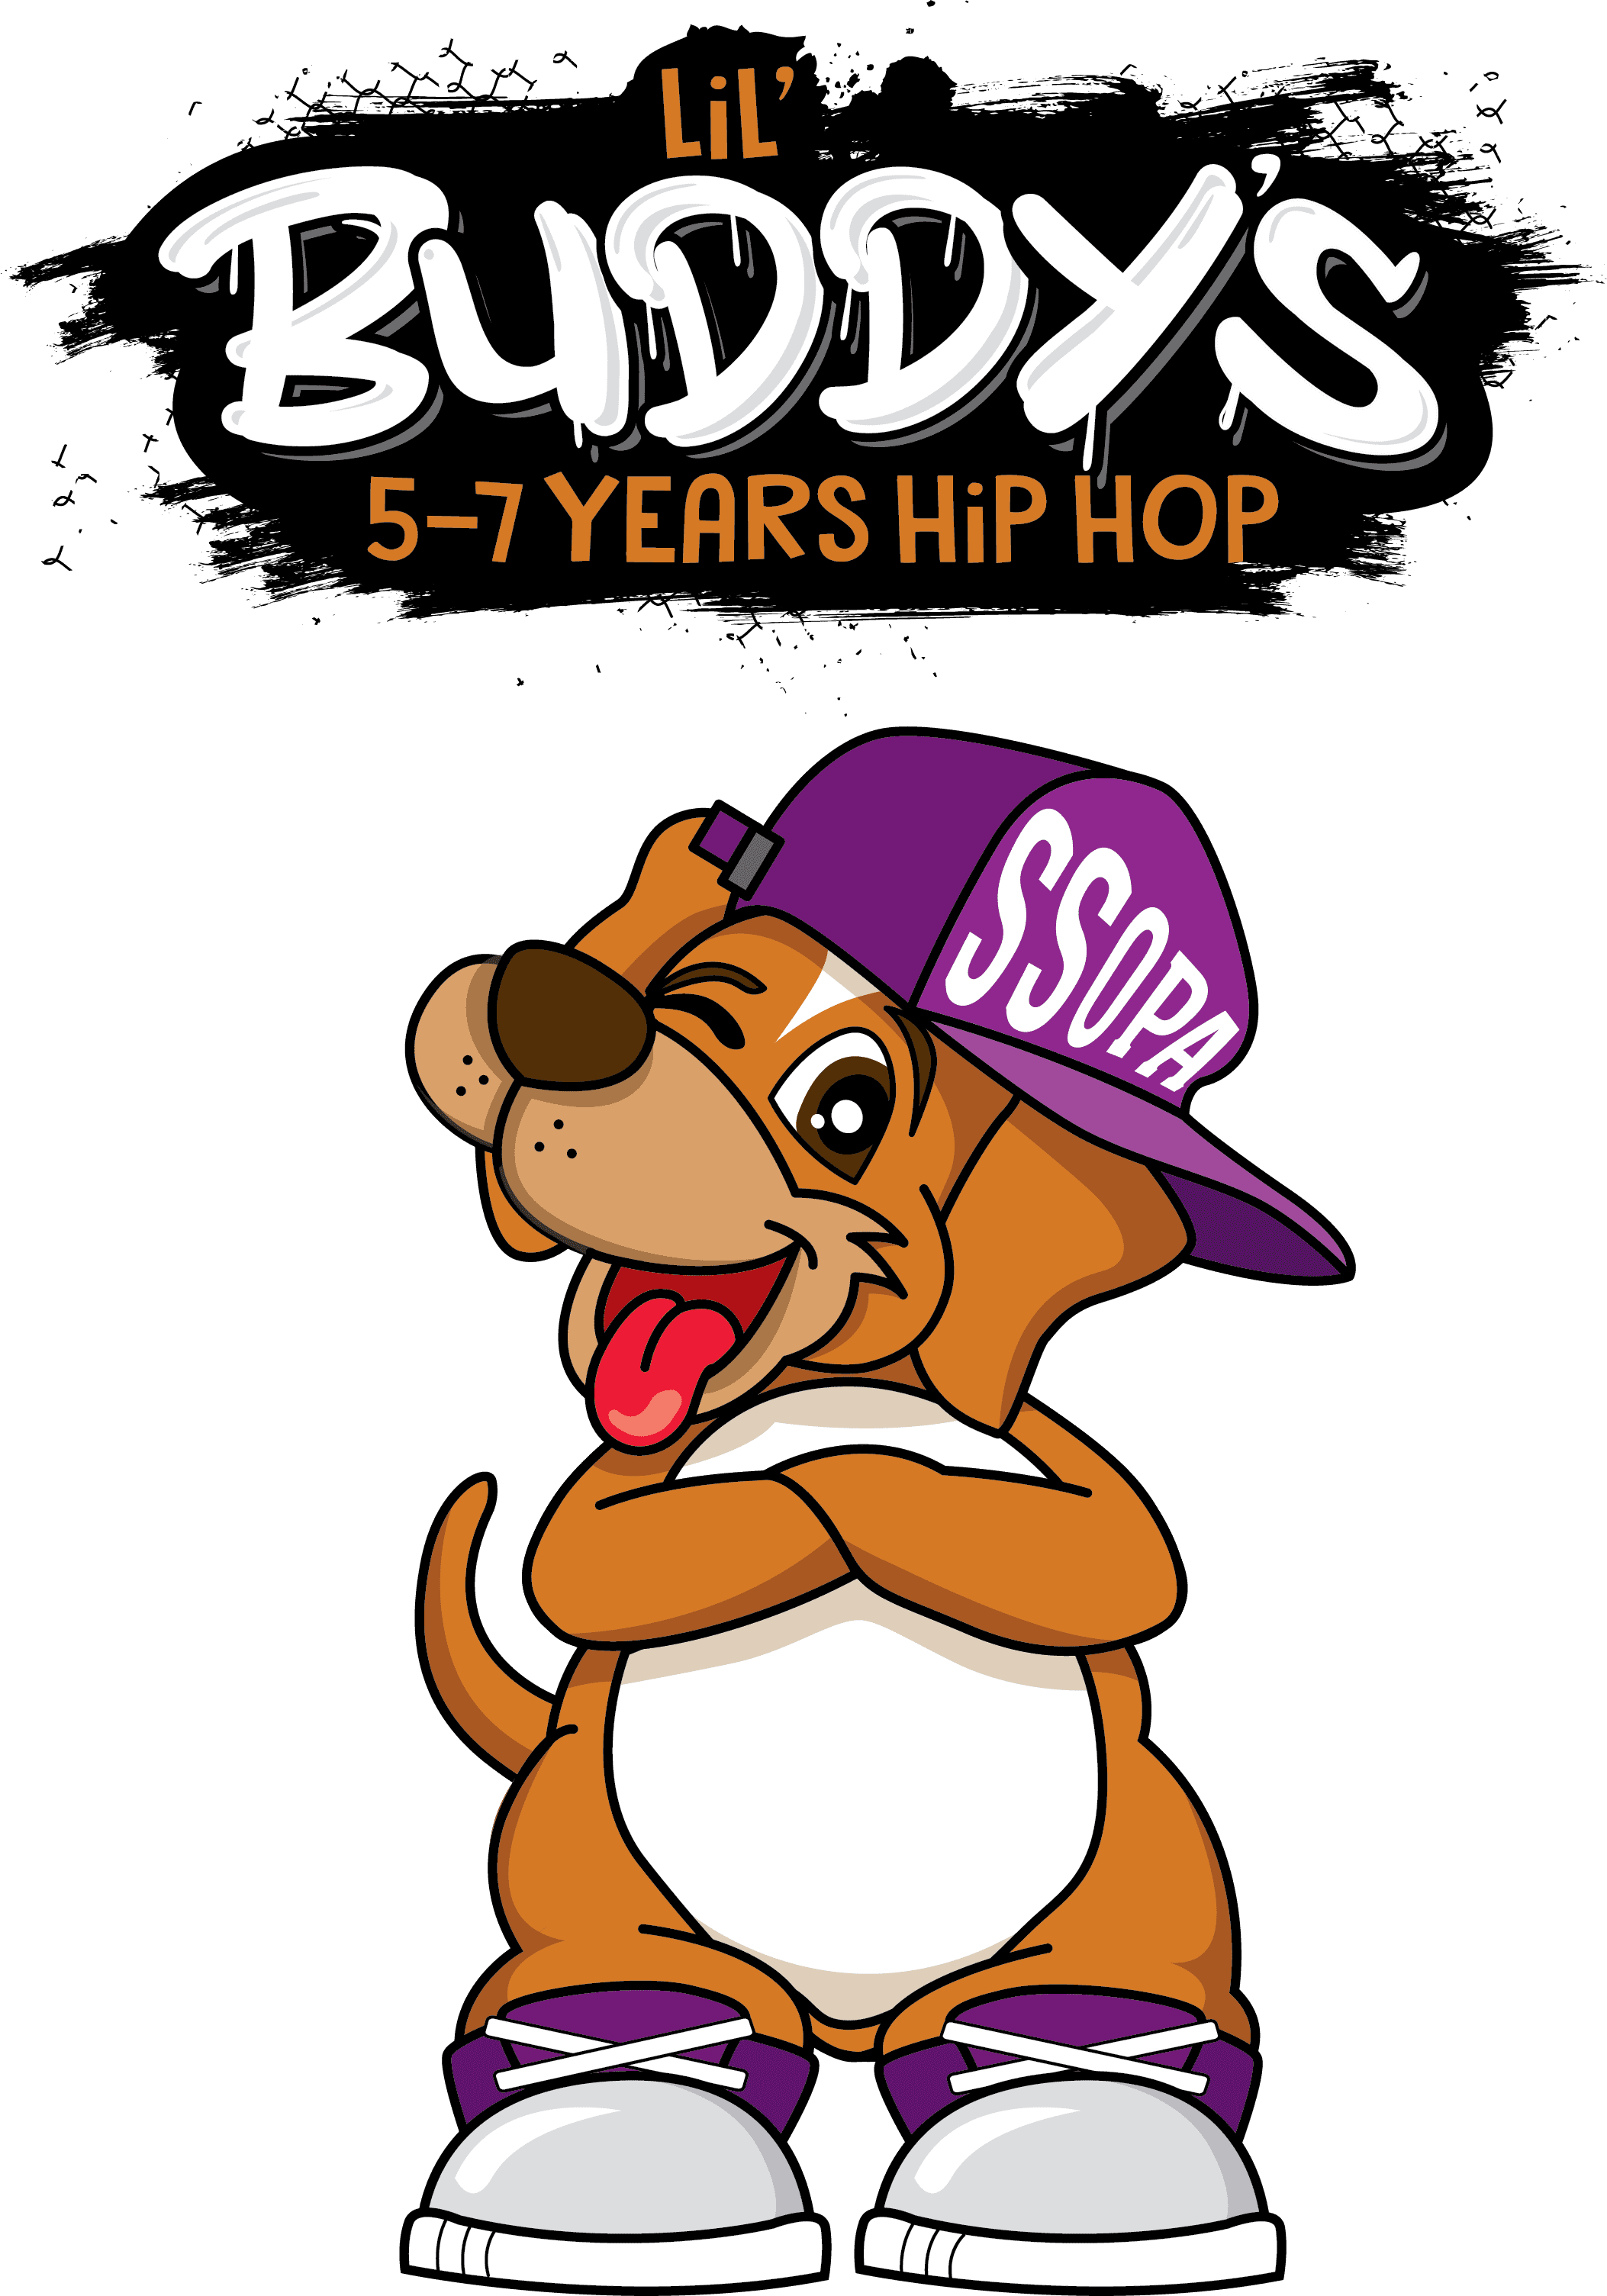 Lil Buddy's Hip Hop Logo at Simone's School of Performing Arts at Berkeley Vale.